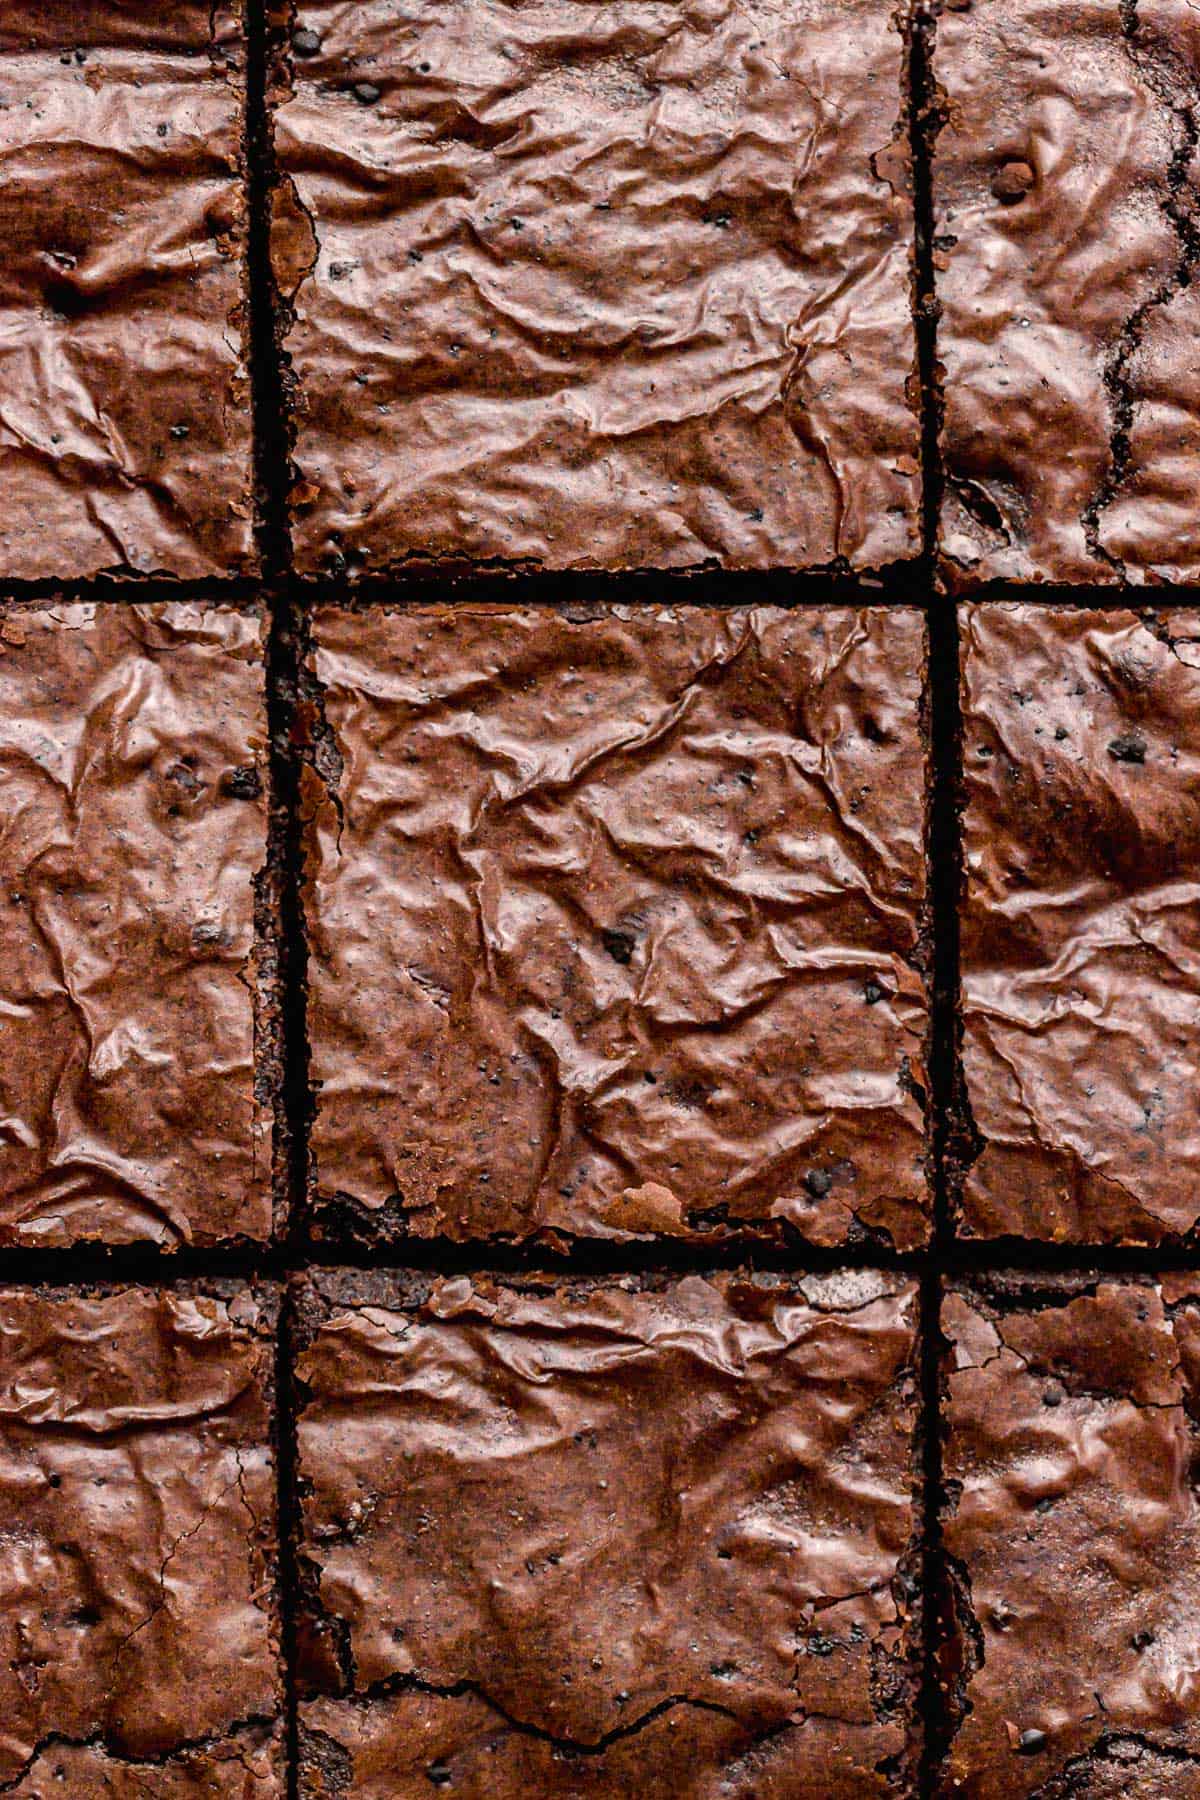 dairy free brownies cut into squares